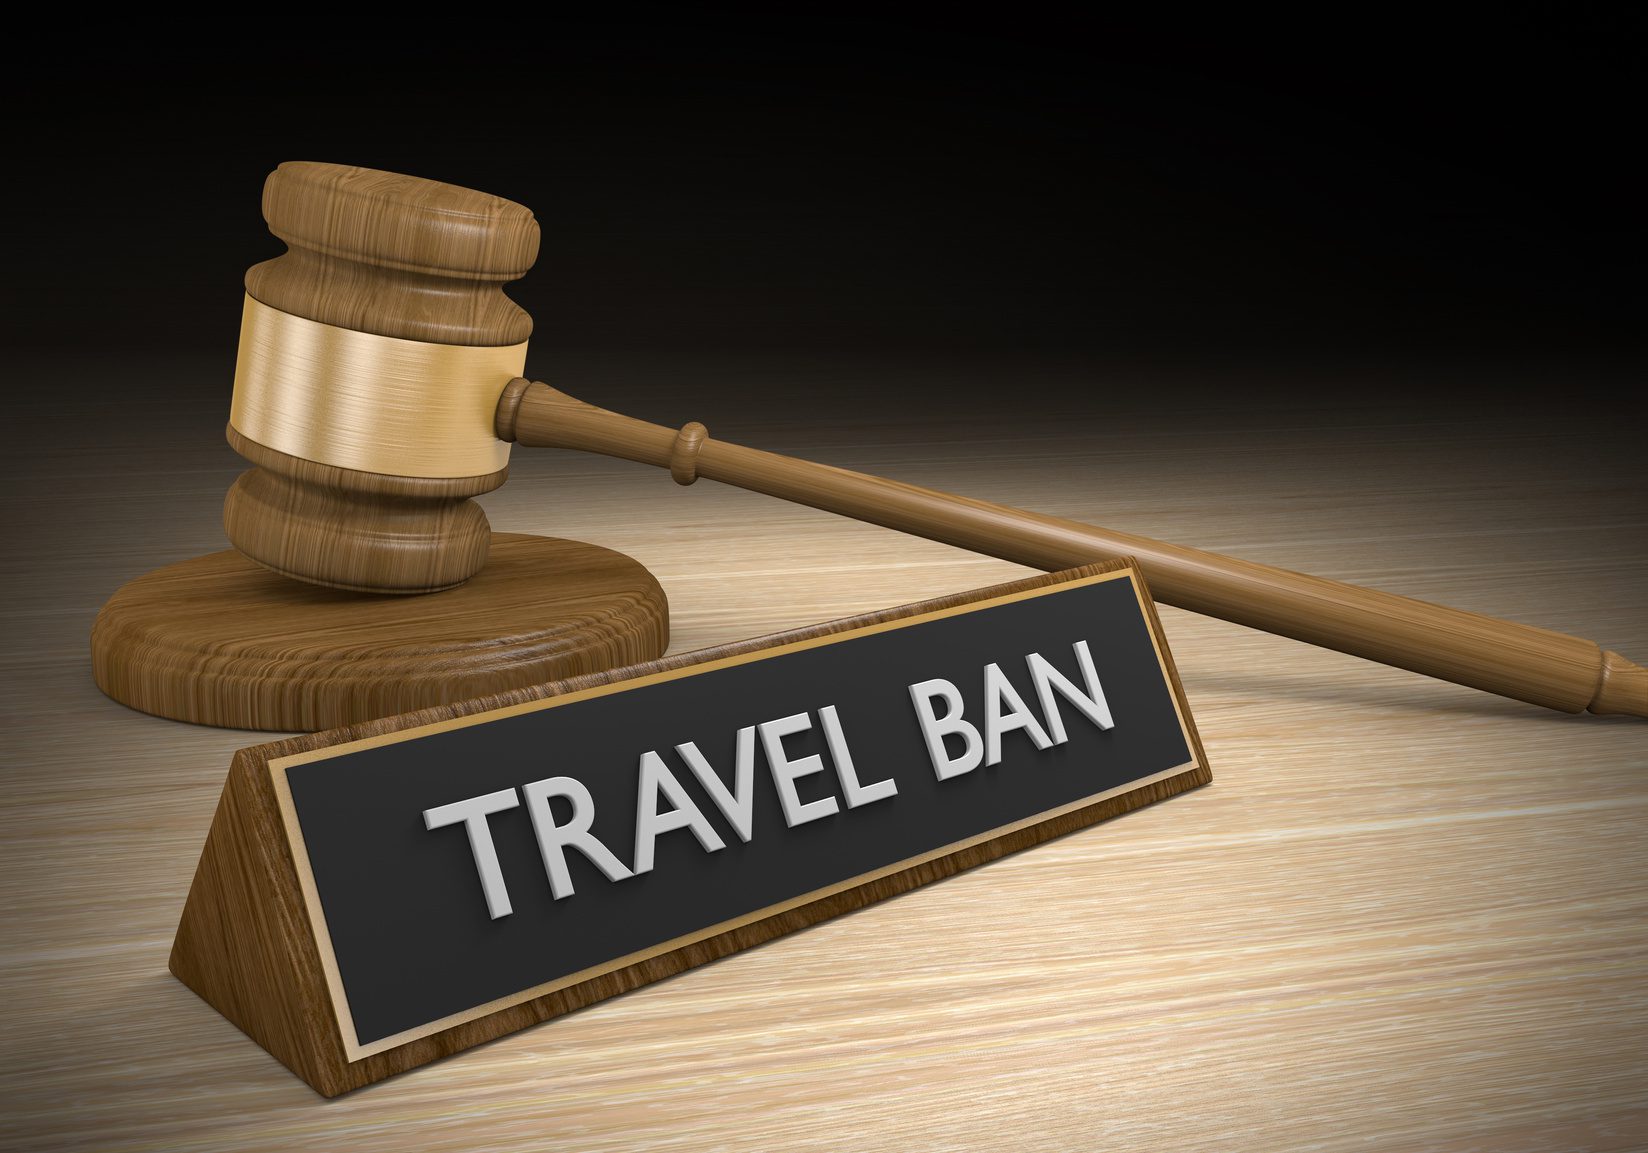 U.S. Supreme Court Agrees to Hear Travel Ban Case, Revives Limited Version of Ban While Case is Pending